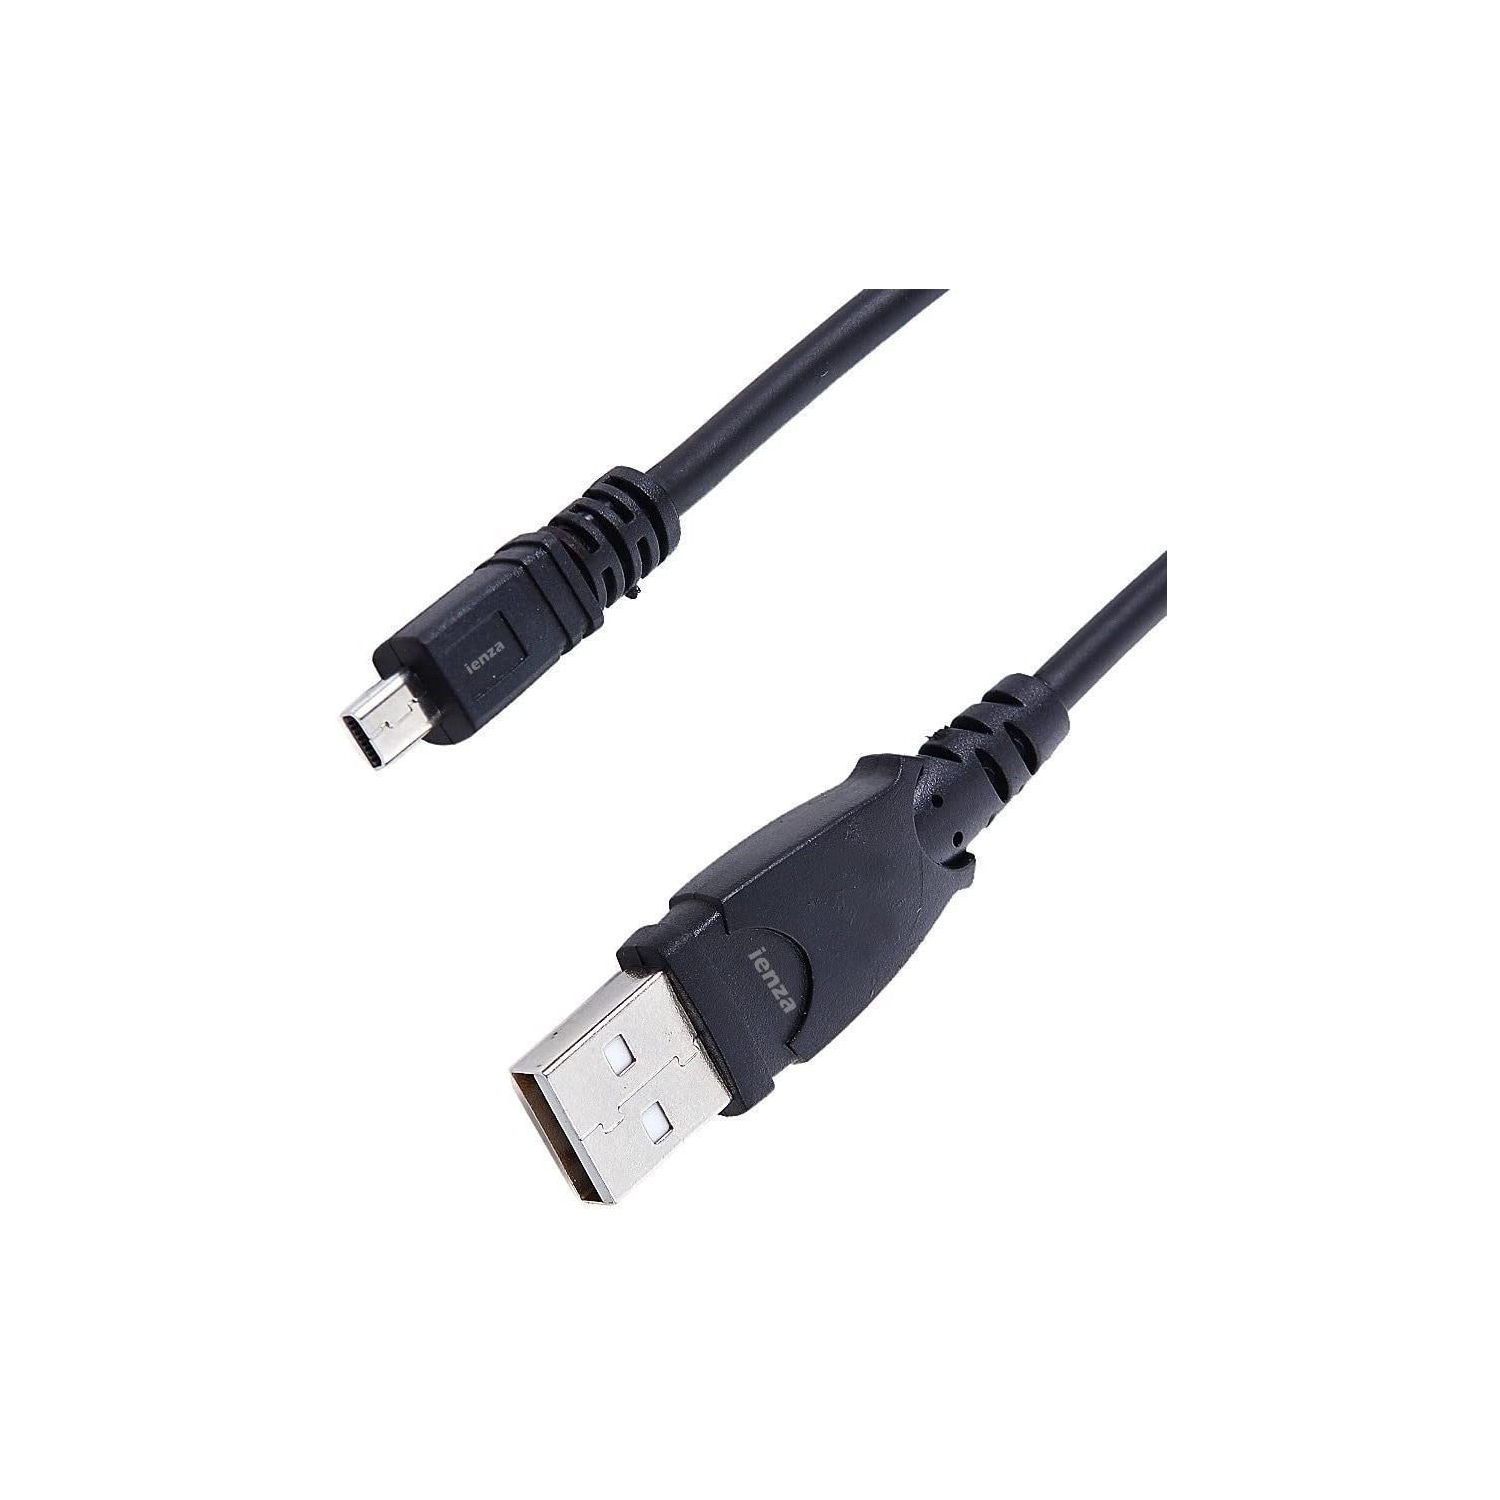 Replacement USB PC Mac Photo Picture Transfer and Charger Cable Cord for Panasonic Lumix Camera DMC-G7 ZS40 ZS50